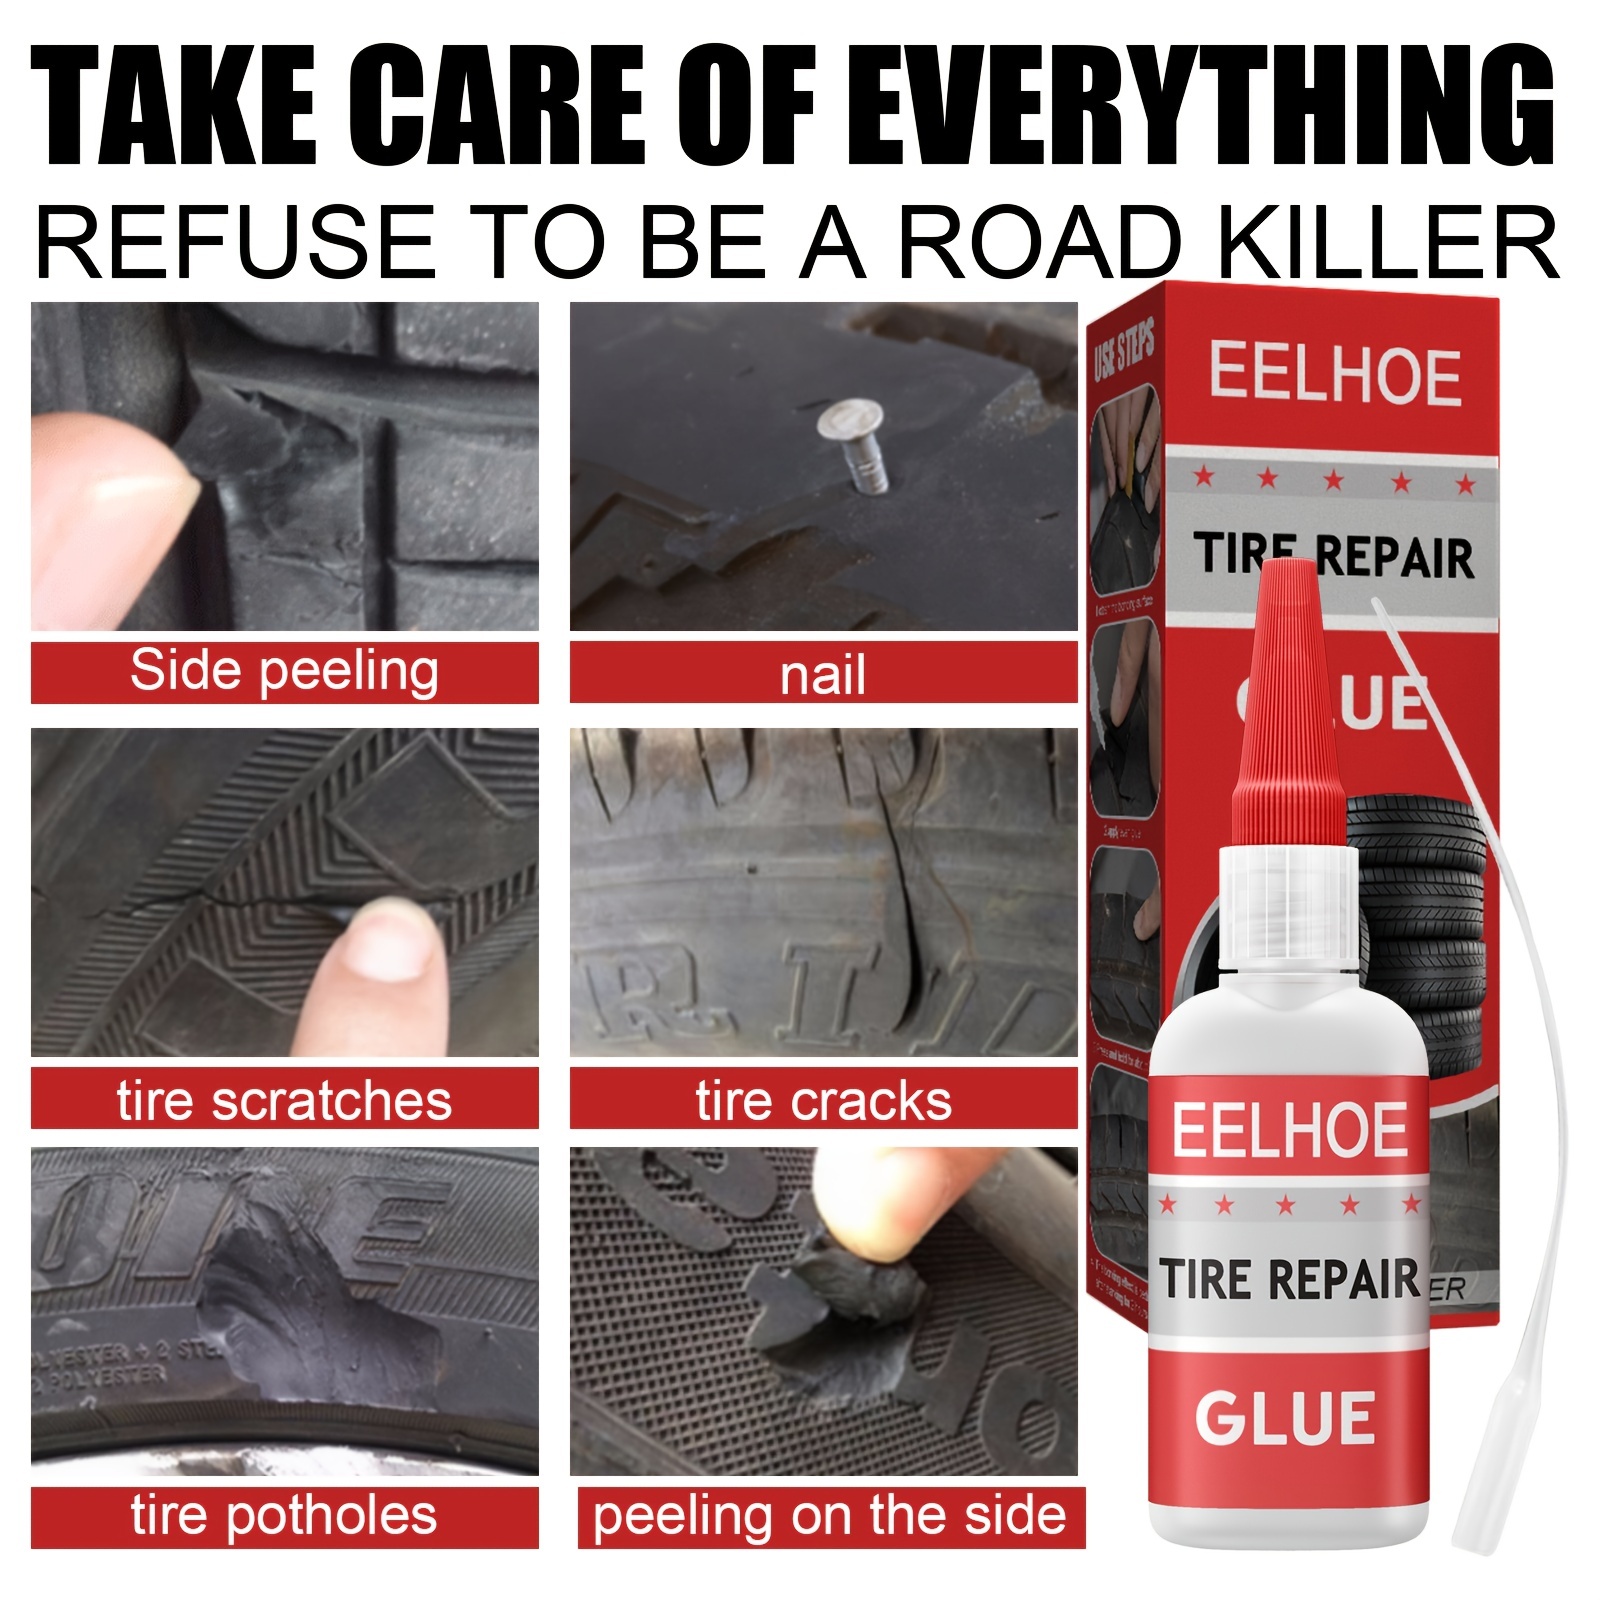  PULME Tire Repair Glue, Rubber Cement Tire Repair, Tire  Puncture Repair Tube, Rubber Tire Fix Glue, Quick Dry Puncture Glue for  Car, Bike, Motorcycle and Buses : Automotive